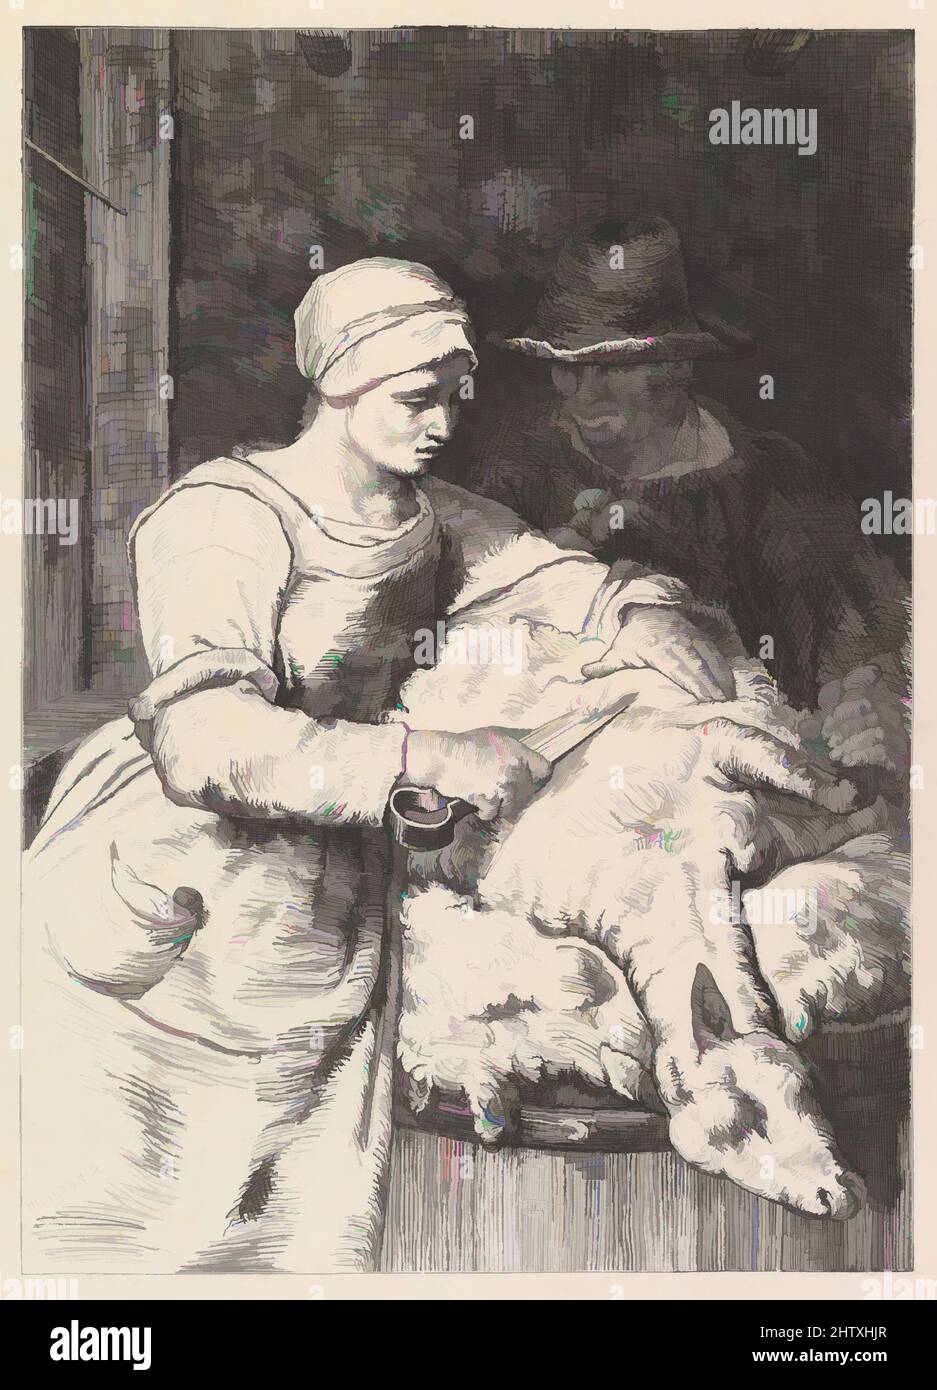 Art inspired by The Sheepshearer, 19th century, Woodcut, Prints, Henry Linton (British, London 1815–1899), After Jean-François Millet (French, Gruchy 1814–1875 Barbizon, Classic works modernized by Artotop with a splash of modernity. Shapes, color and value, eye-catching visual impact on art. Emotions through freedom of artworks in a contemporary way. A timeless message pursuing a wildly creative new direction. Artists turning to the digital medium and creating the Artotop NFT Stock Photo